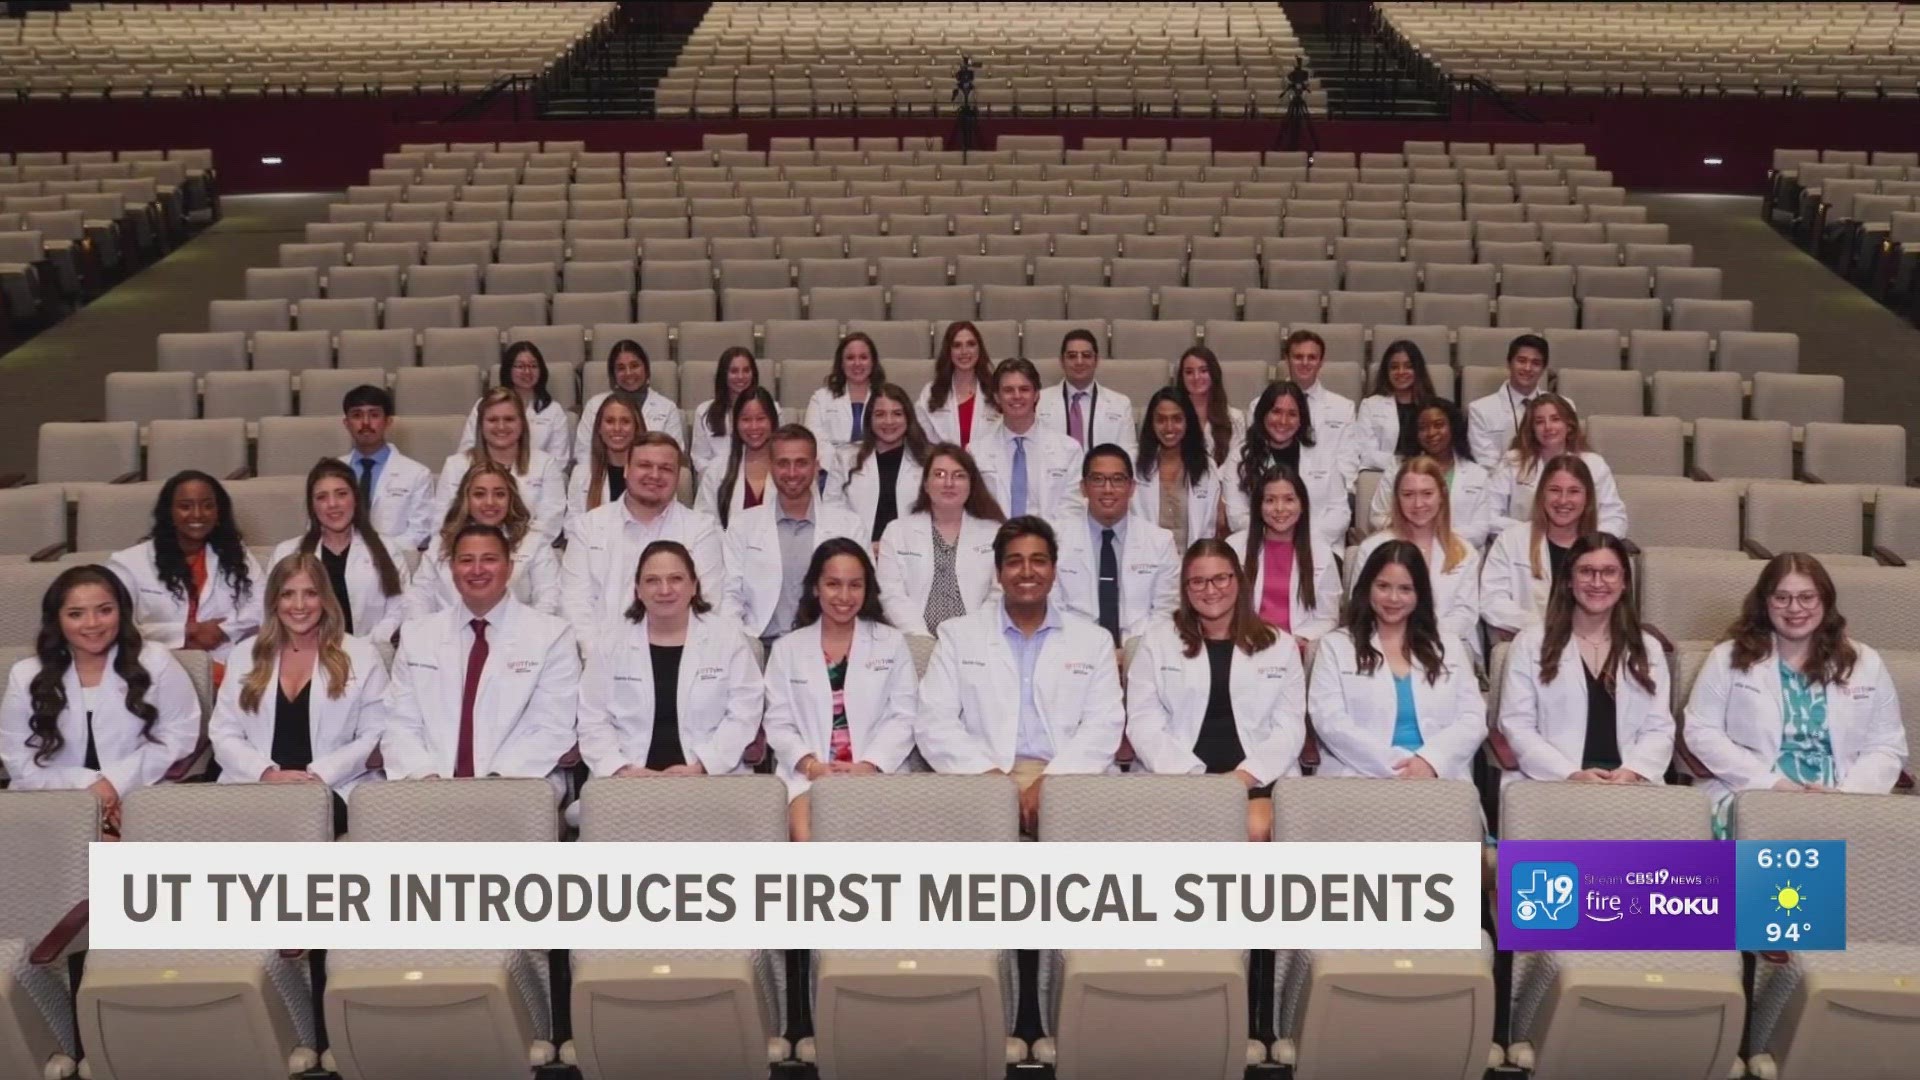 UT Tyler School of Medicine introduces first medical students